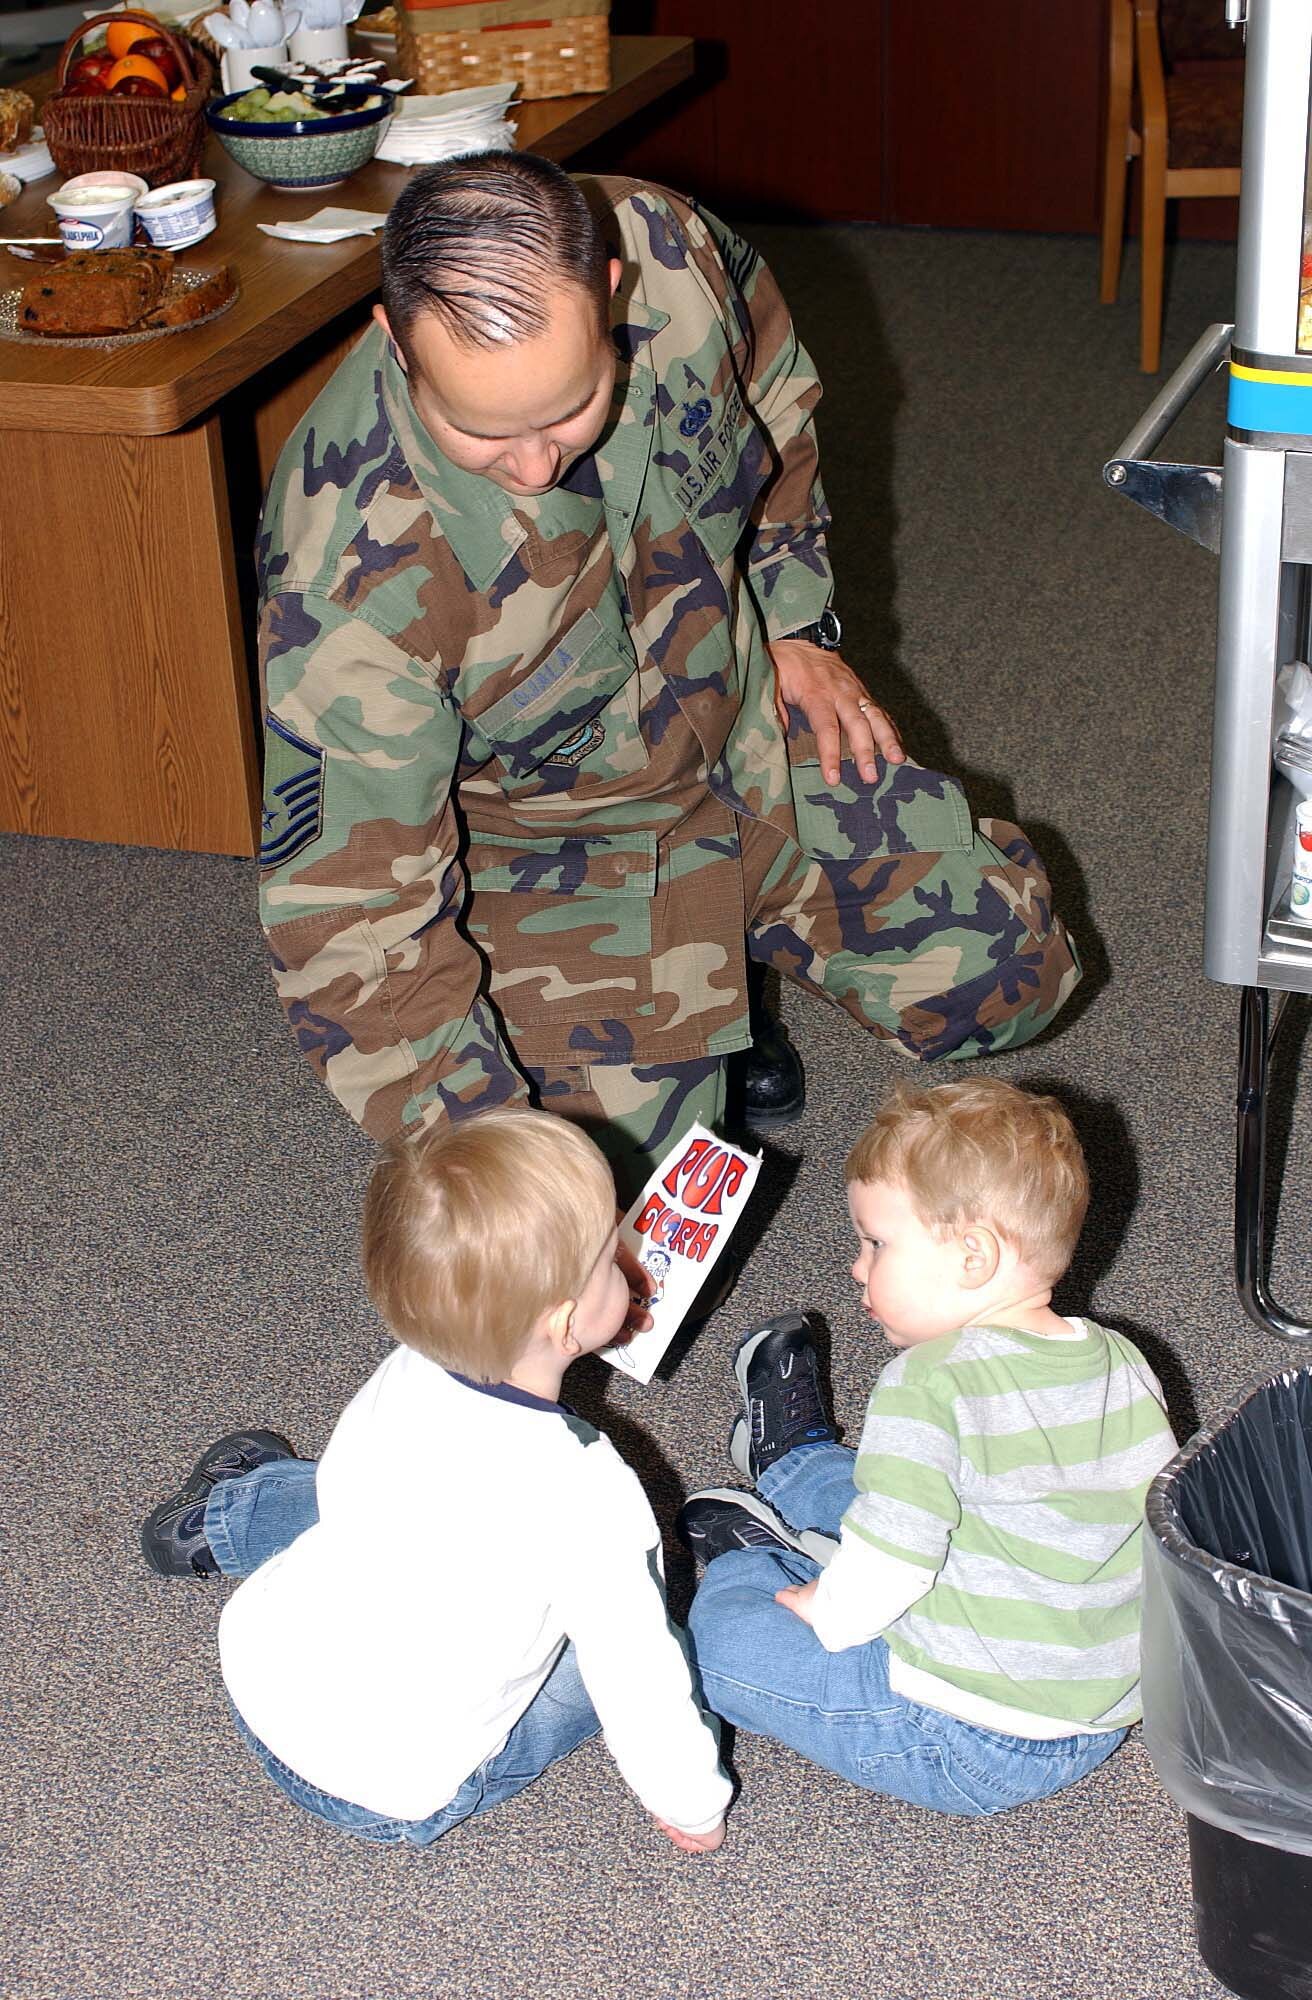 Master Sgt. Wayne Ojala, Airmen and Family Readiness Center superintendent, shares some popcorn with children during an open house event at the center here March 28.  The event, which included several base agencies, highlighted the resources available to base personnel and family members. (U.S. Air Force photo/Tech. Sgt. Joseph Kapinos)